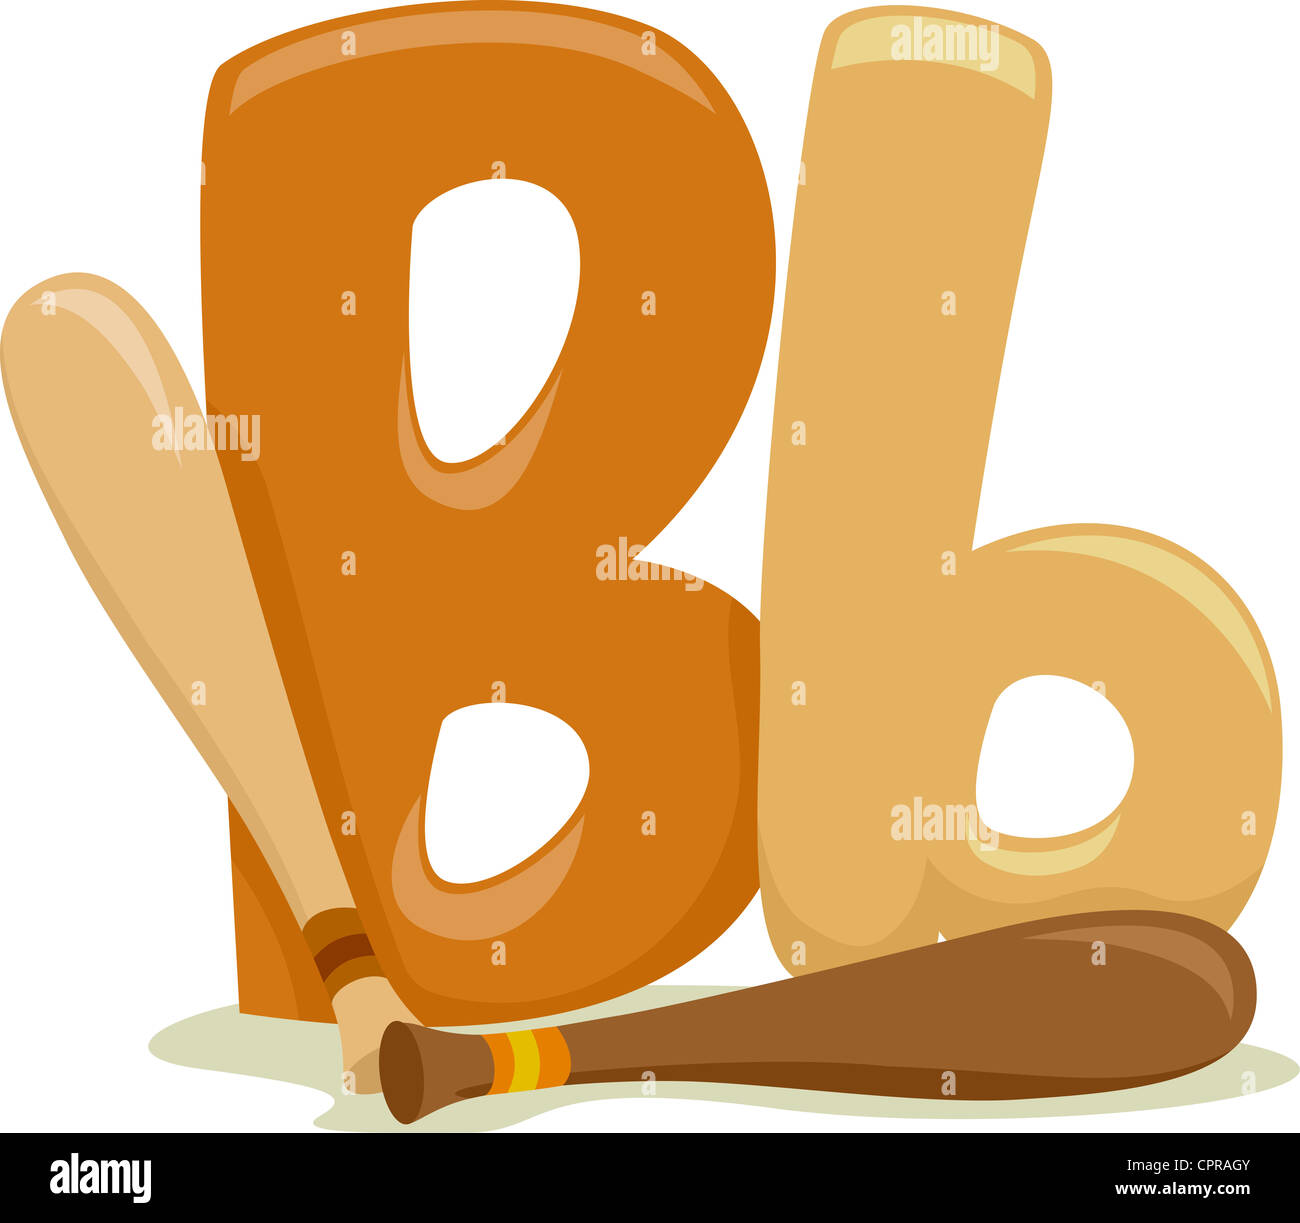 Illustration Featuring the Letter B Stock Photo